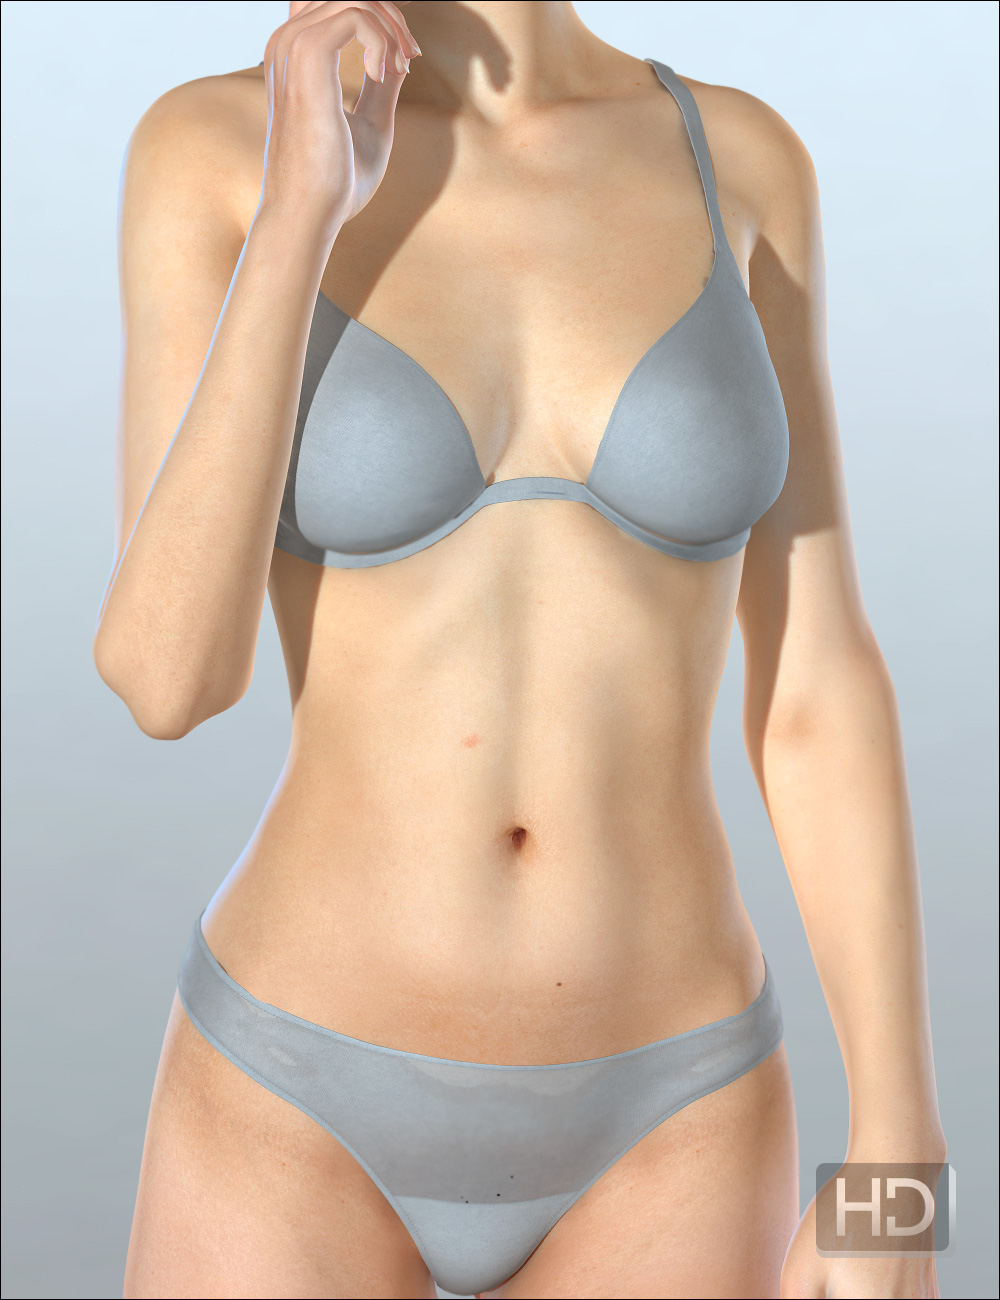 Estelle HD Character and Hair by: Valea, 3D Models by Daz 3D